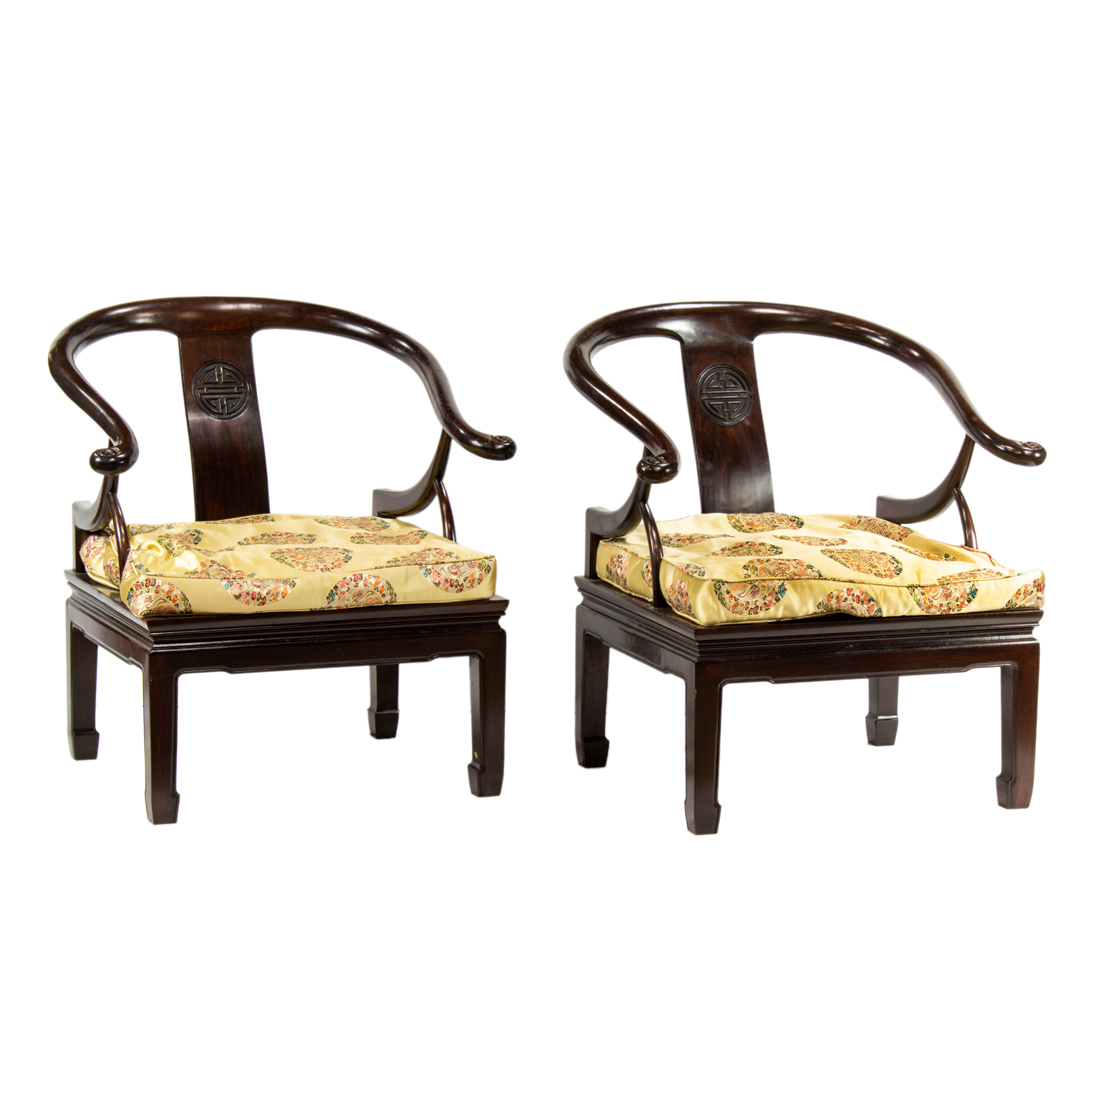 PAIR OF CHINESE STYLE HARDWOOD 3a2483